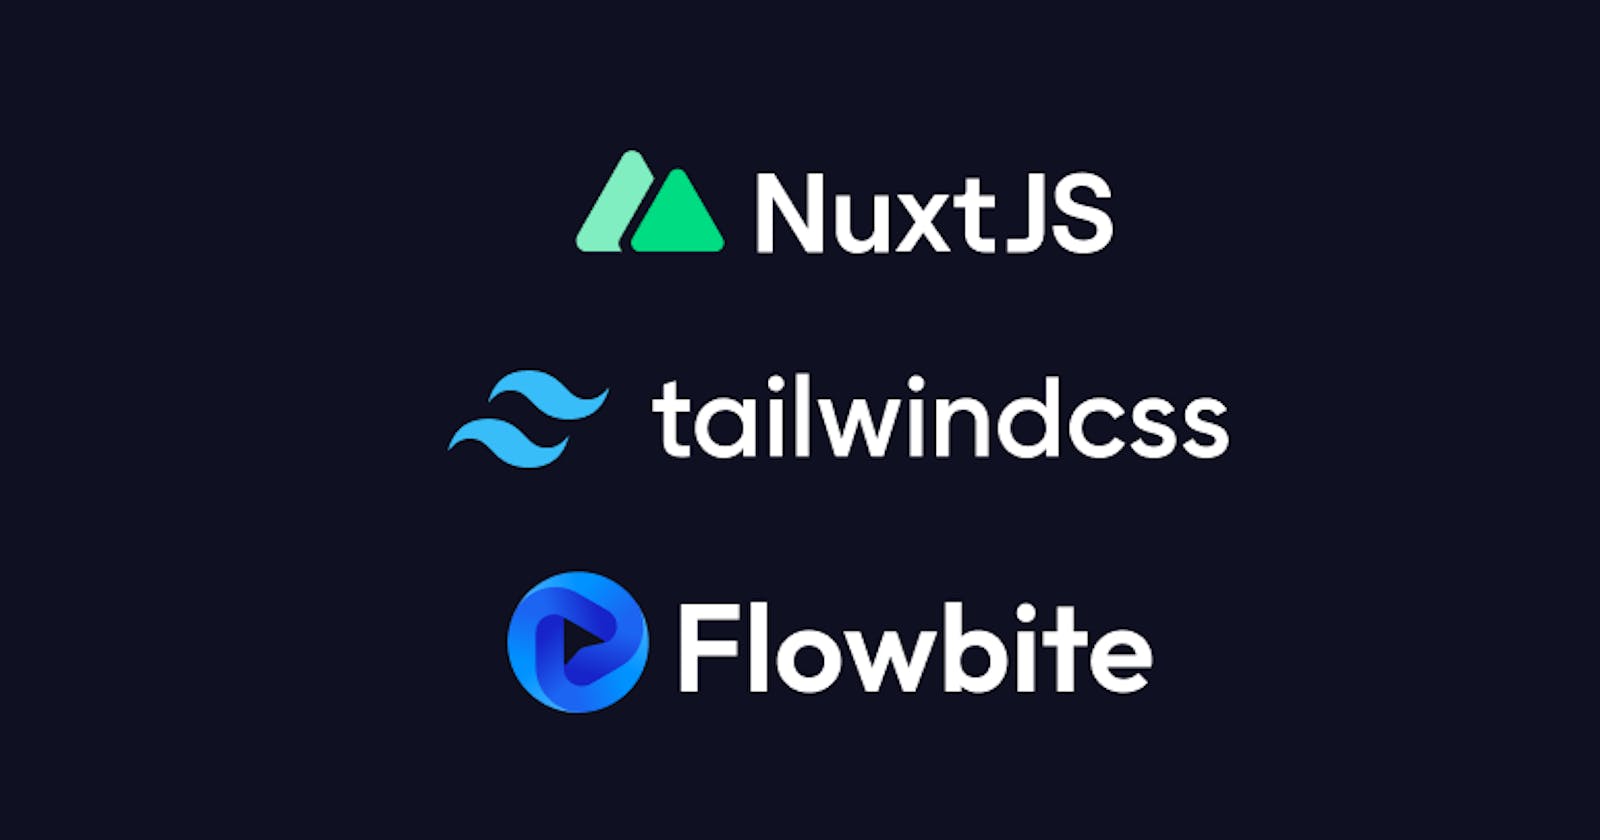 How to install Tailwind CSS with Nuxt.js and Flowbite